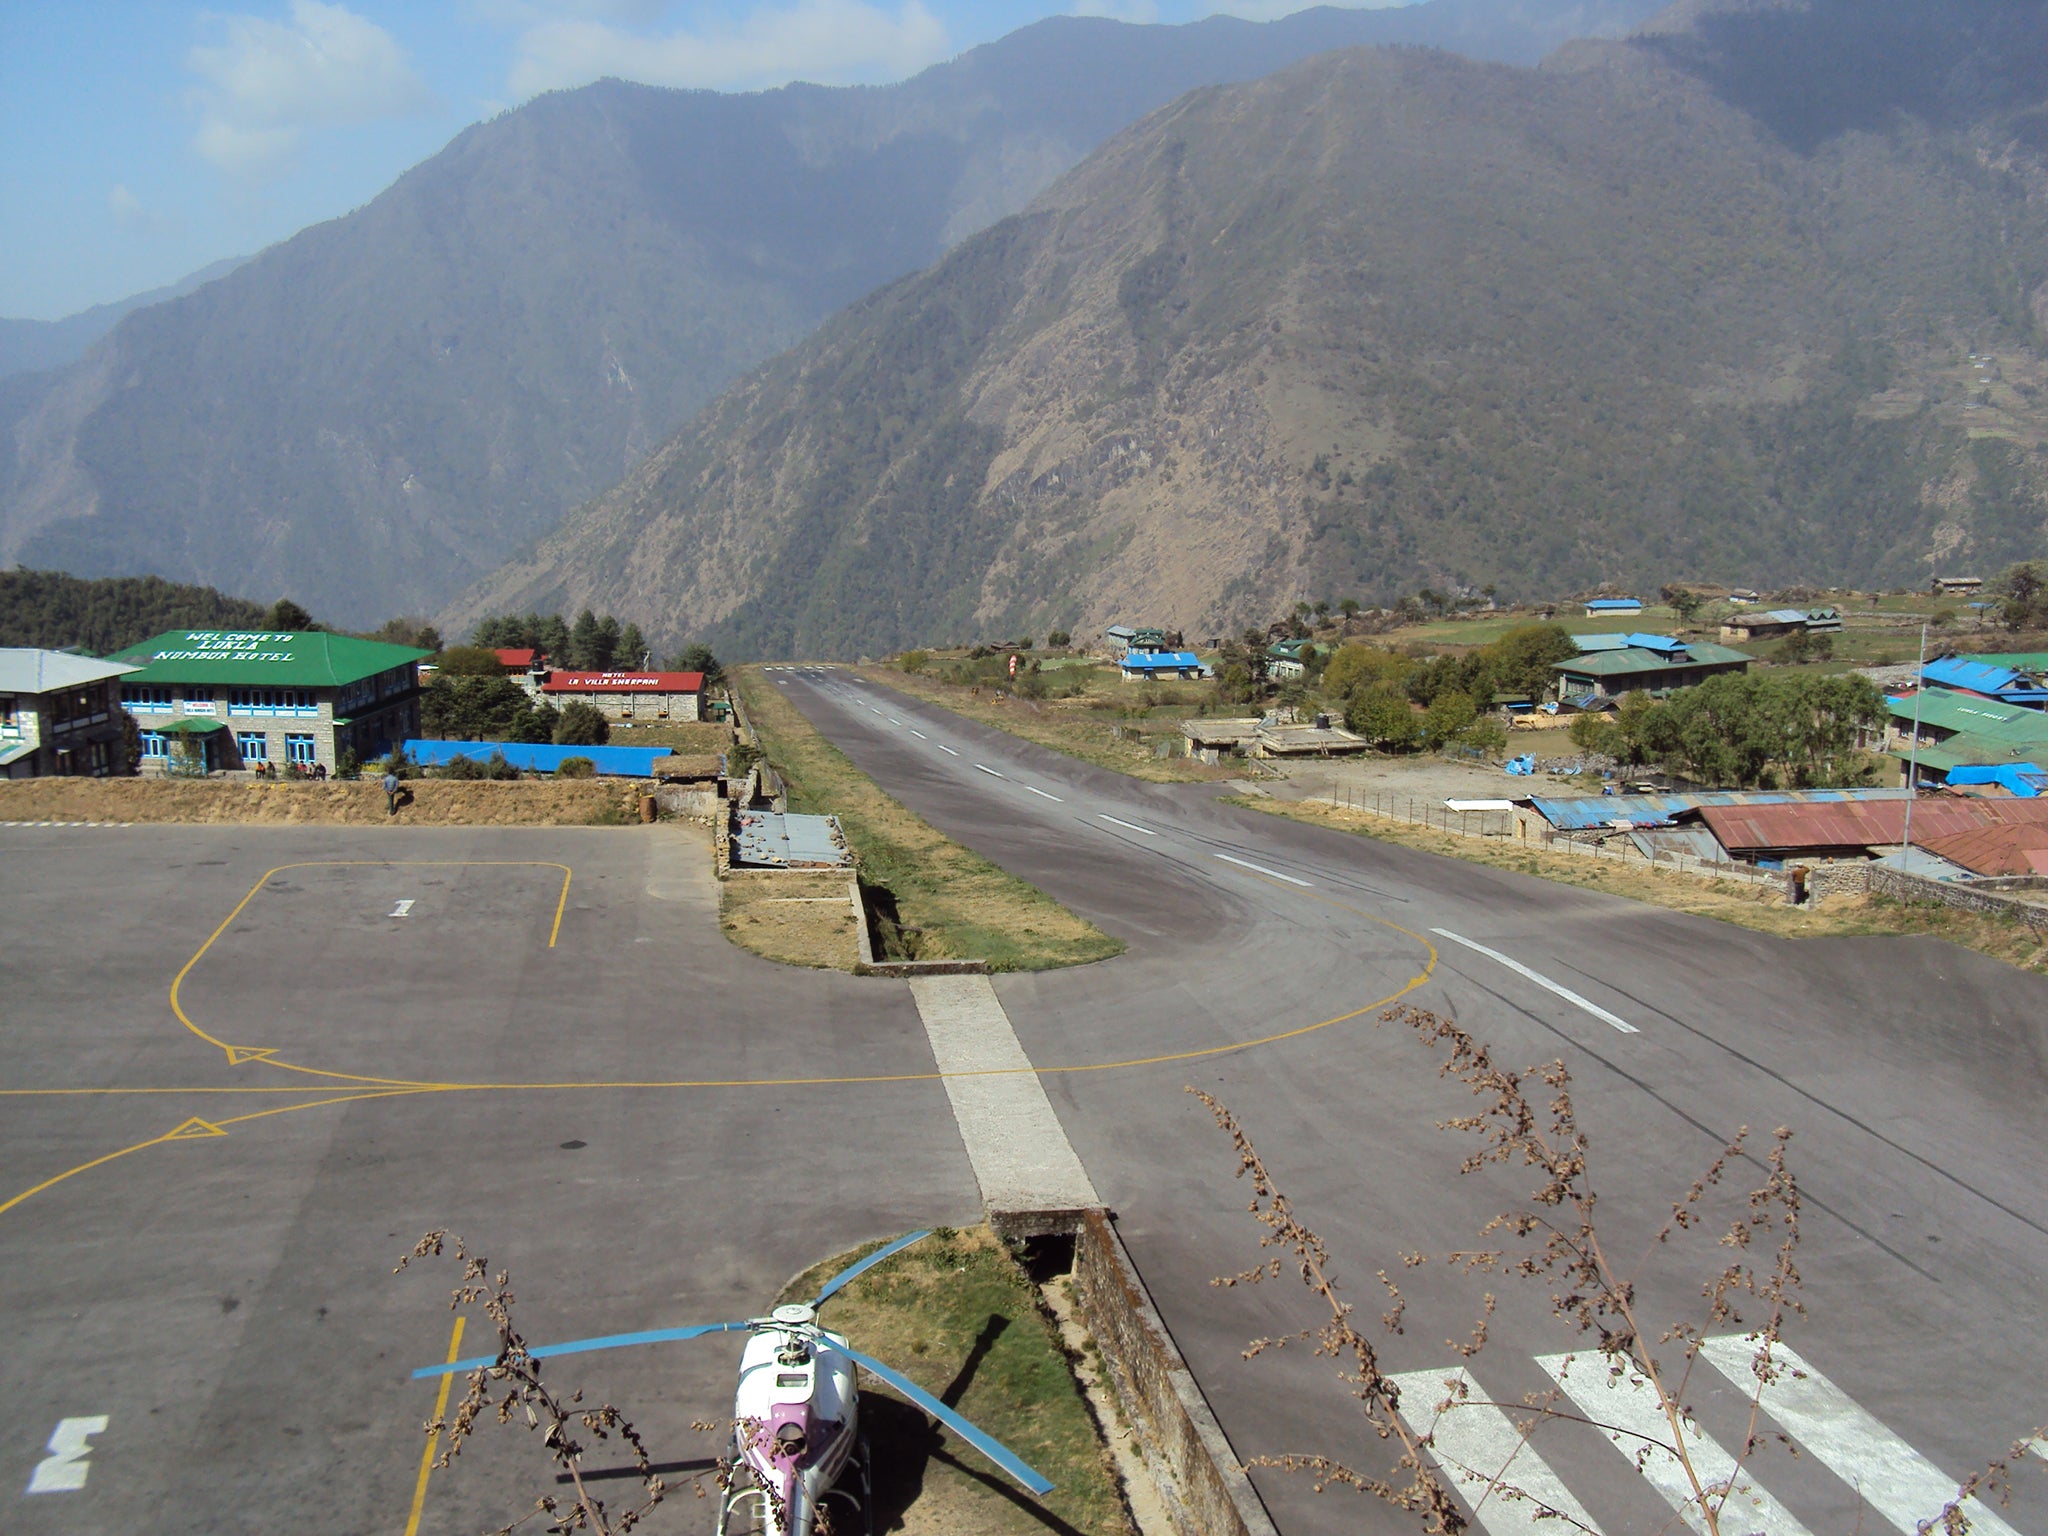 Pilots need to take caution at Tenzing-Hillary Airport in Nepal, what with the sloping runway (Picture: Wikimedia/Jeremy Broomfield)